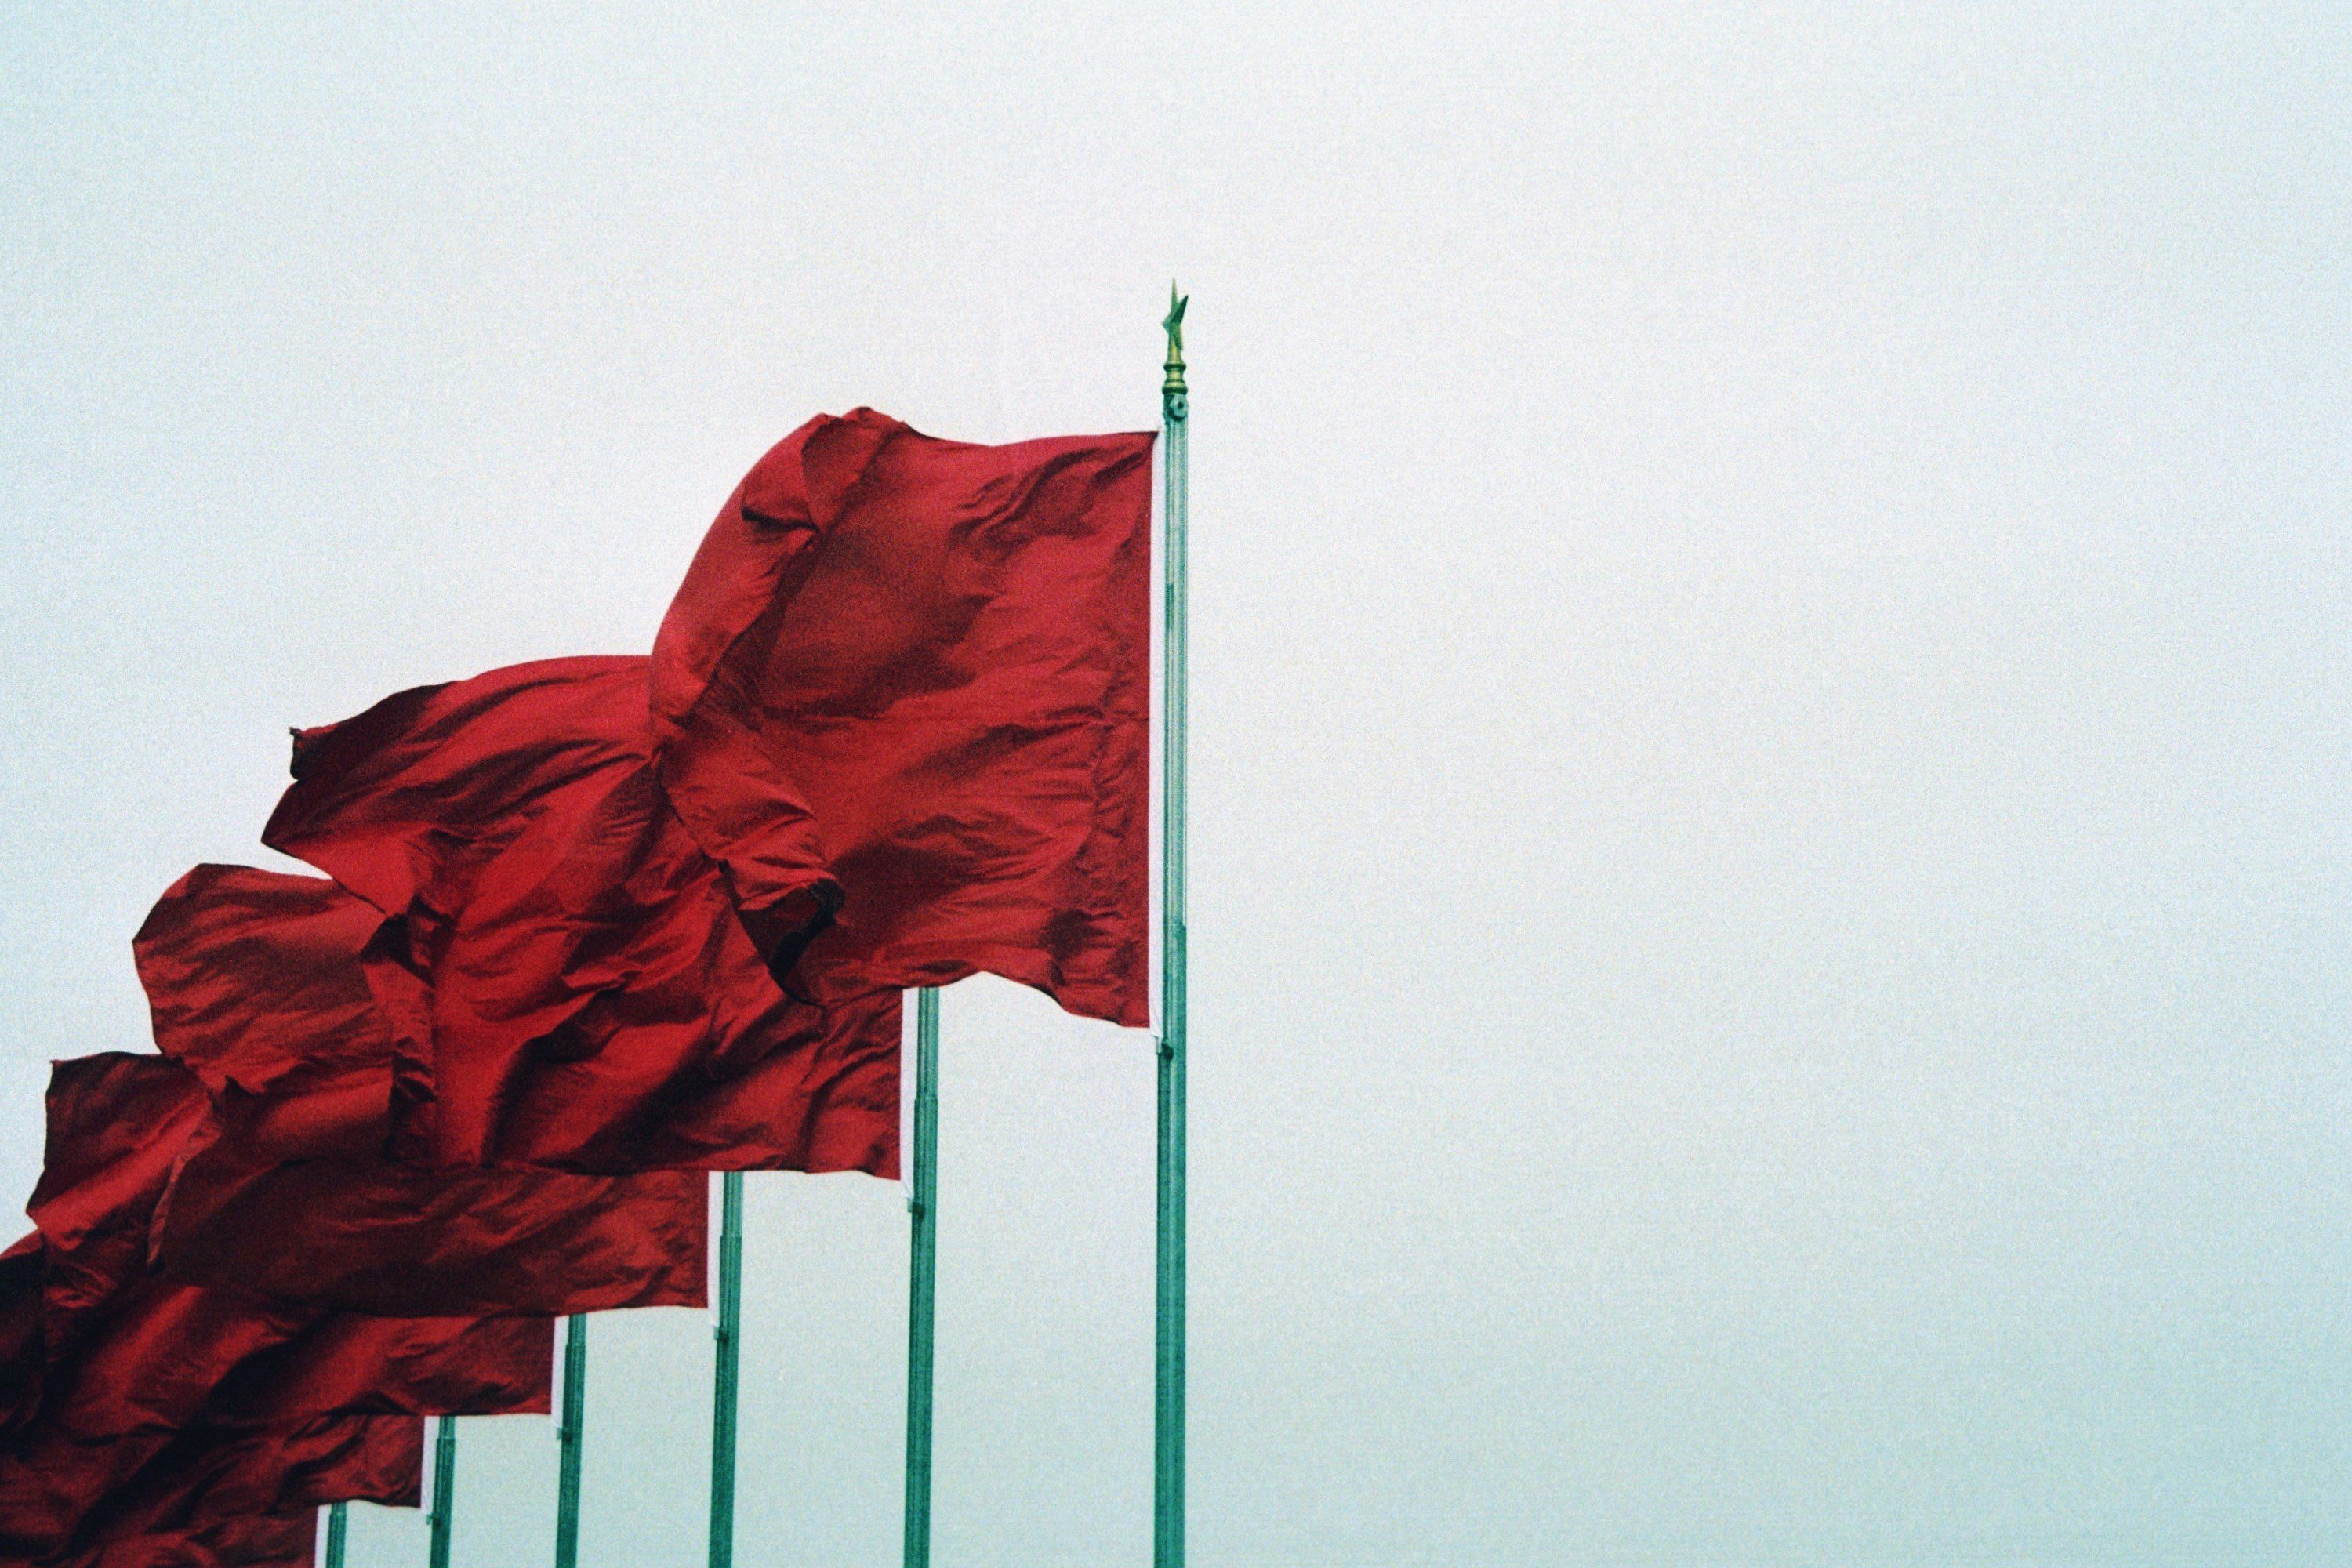 Red flags - Photo by Zachary Keimig on Unsplash